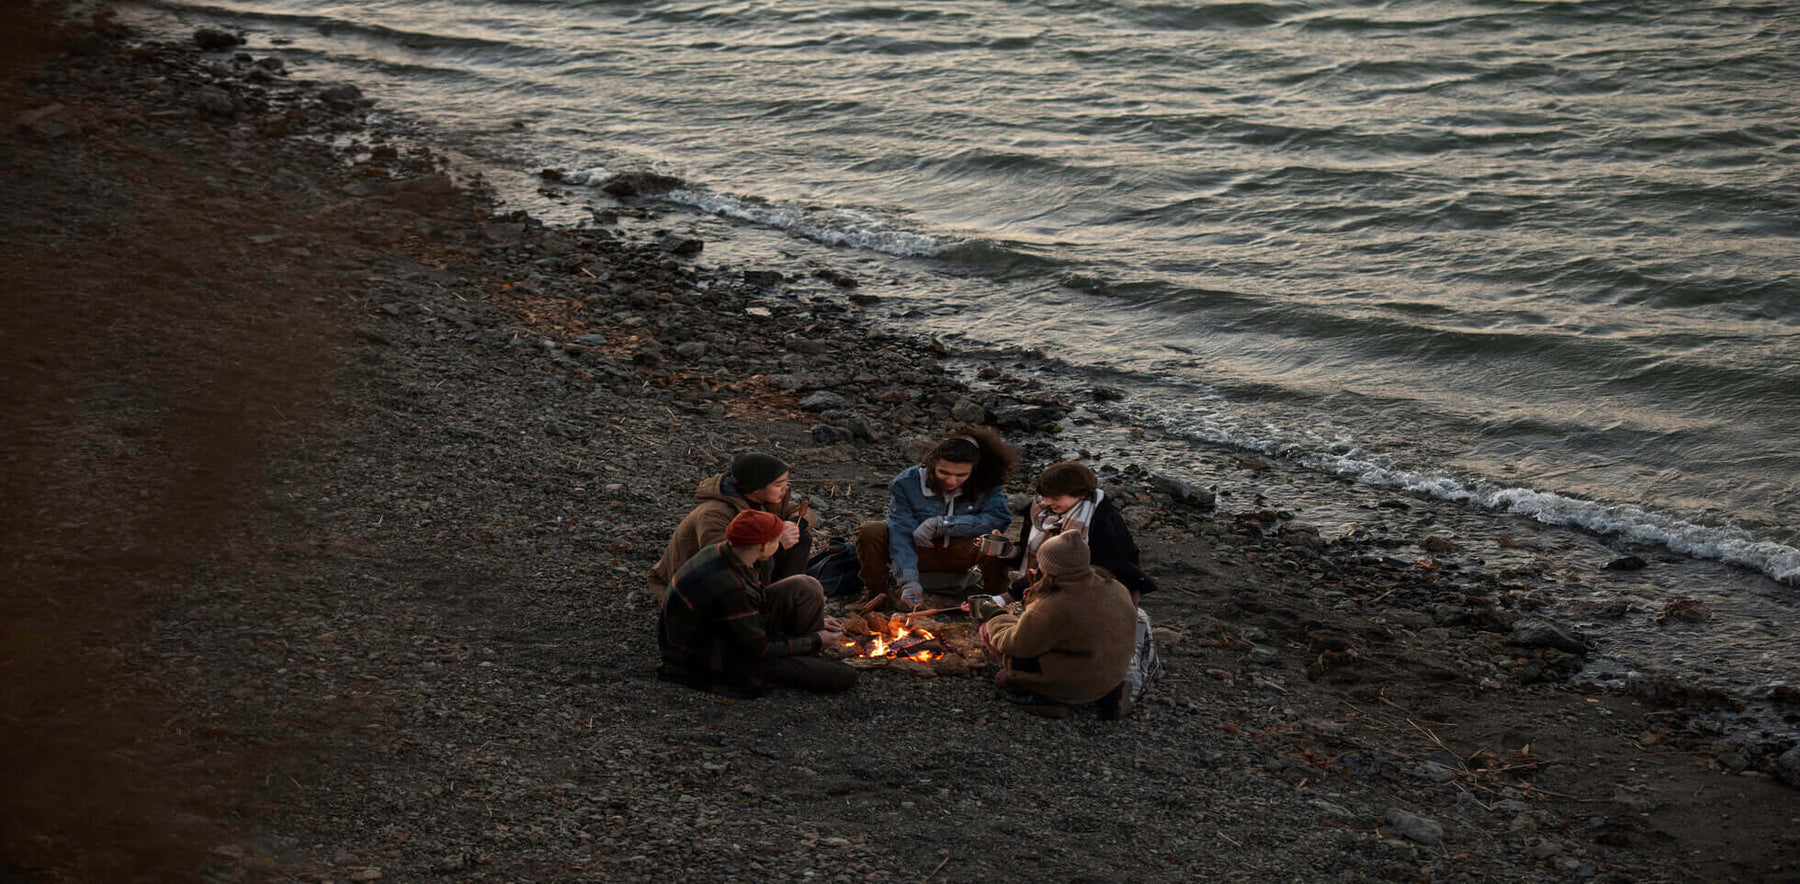 Friends enjoy camping by the beach